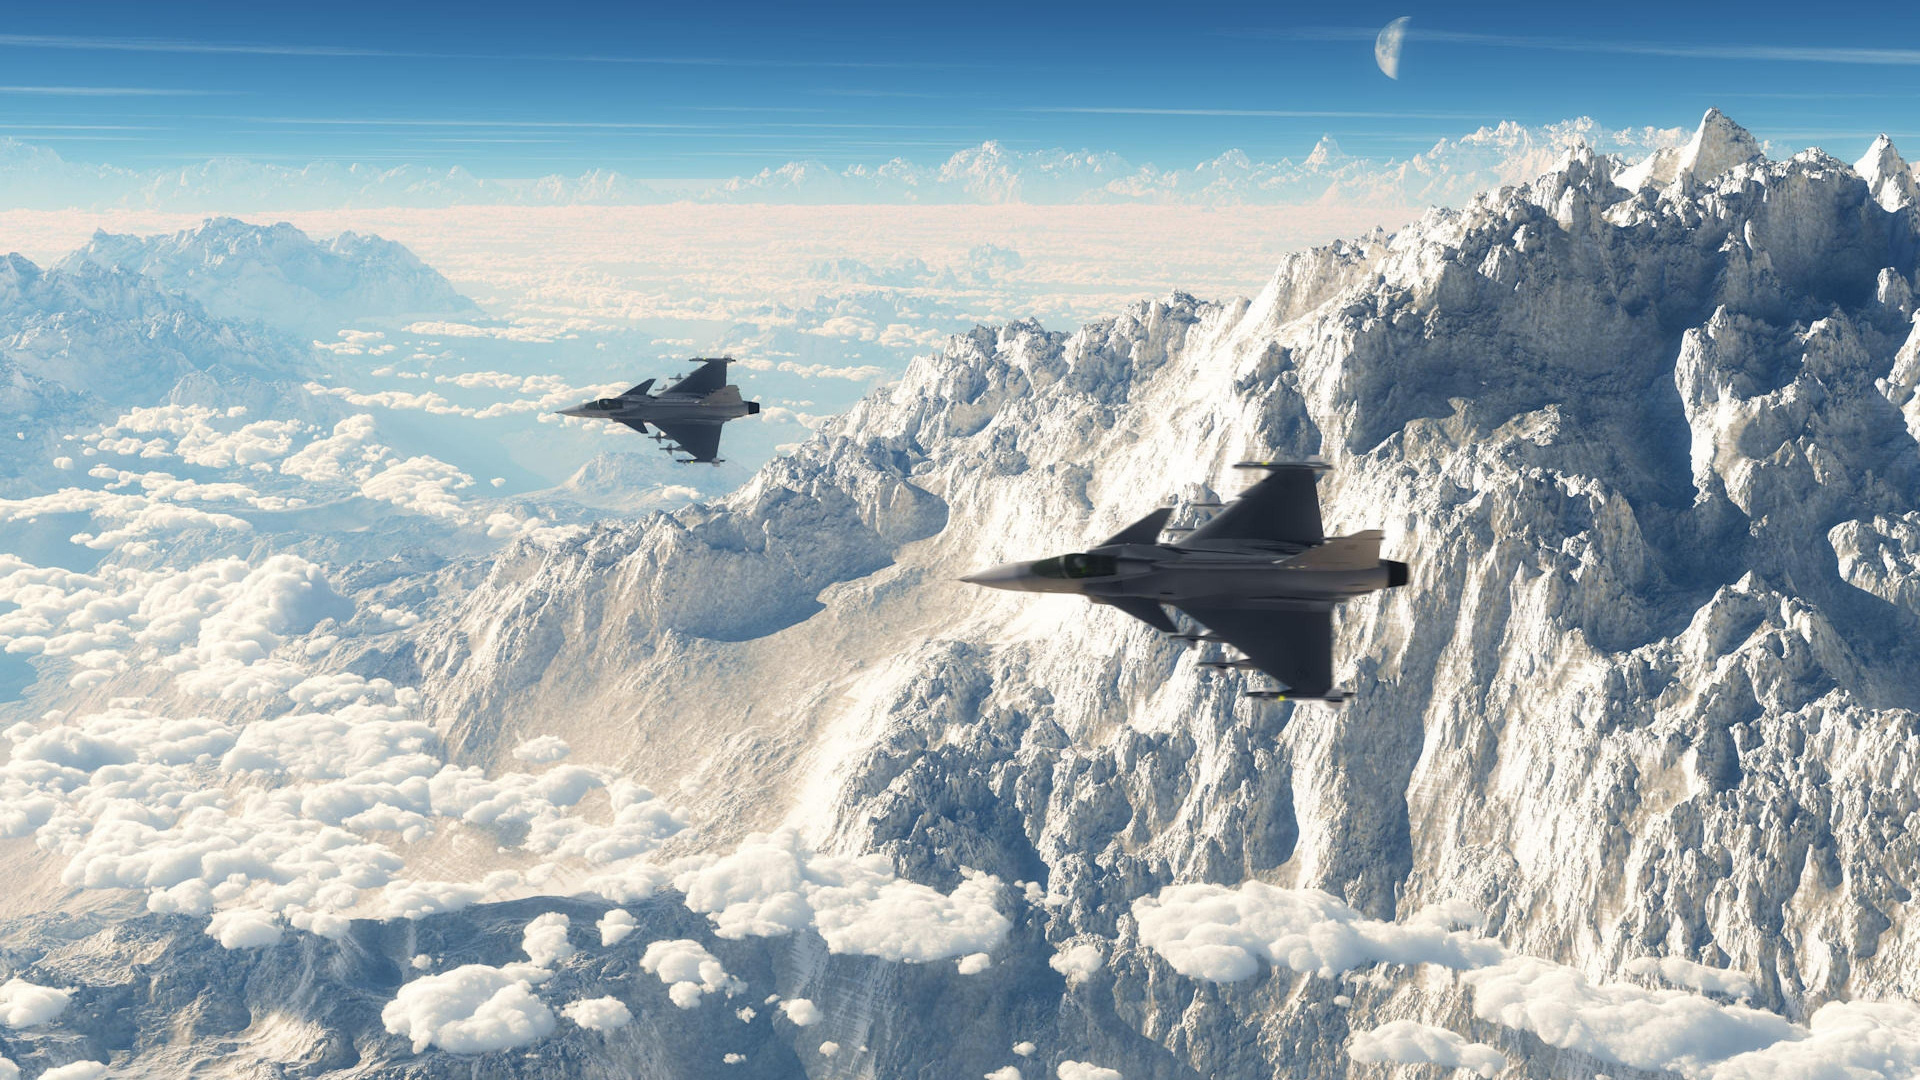 Black Fighter Plane Flying Over Snow Covered Mountain During Daytime. Wallpaper in 1920x1080 Resolution